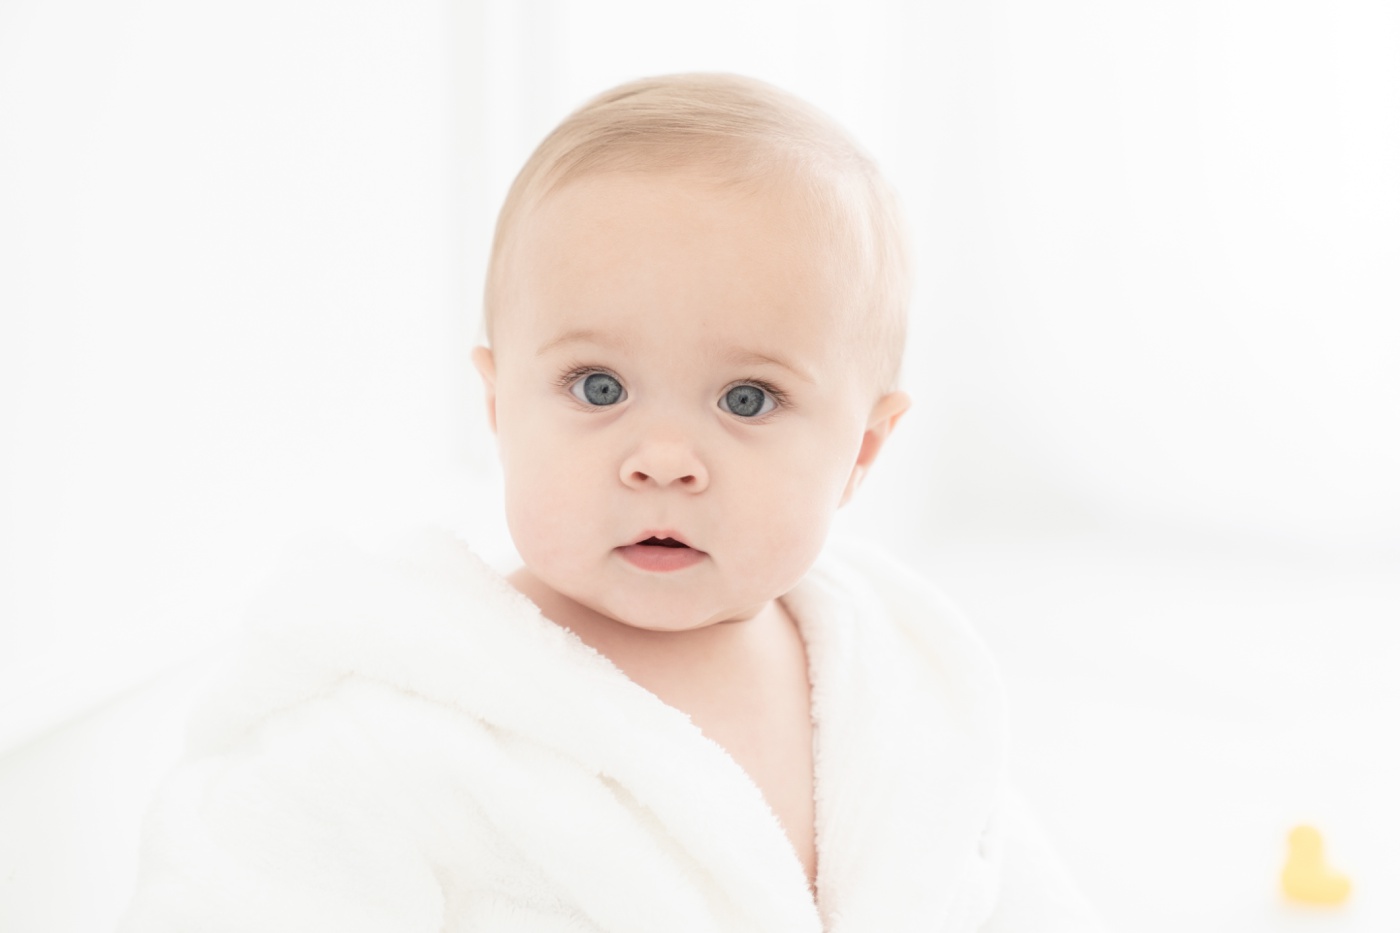 Baby girl in a white bathrobe by a natural light window being photographed for her one year photoshoot